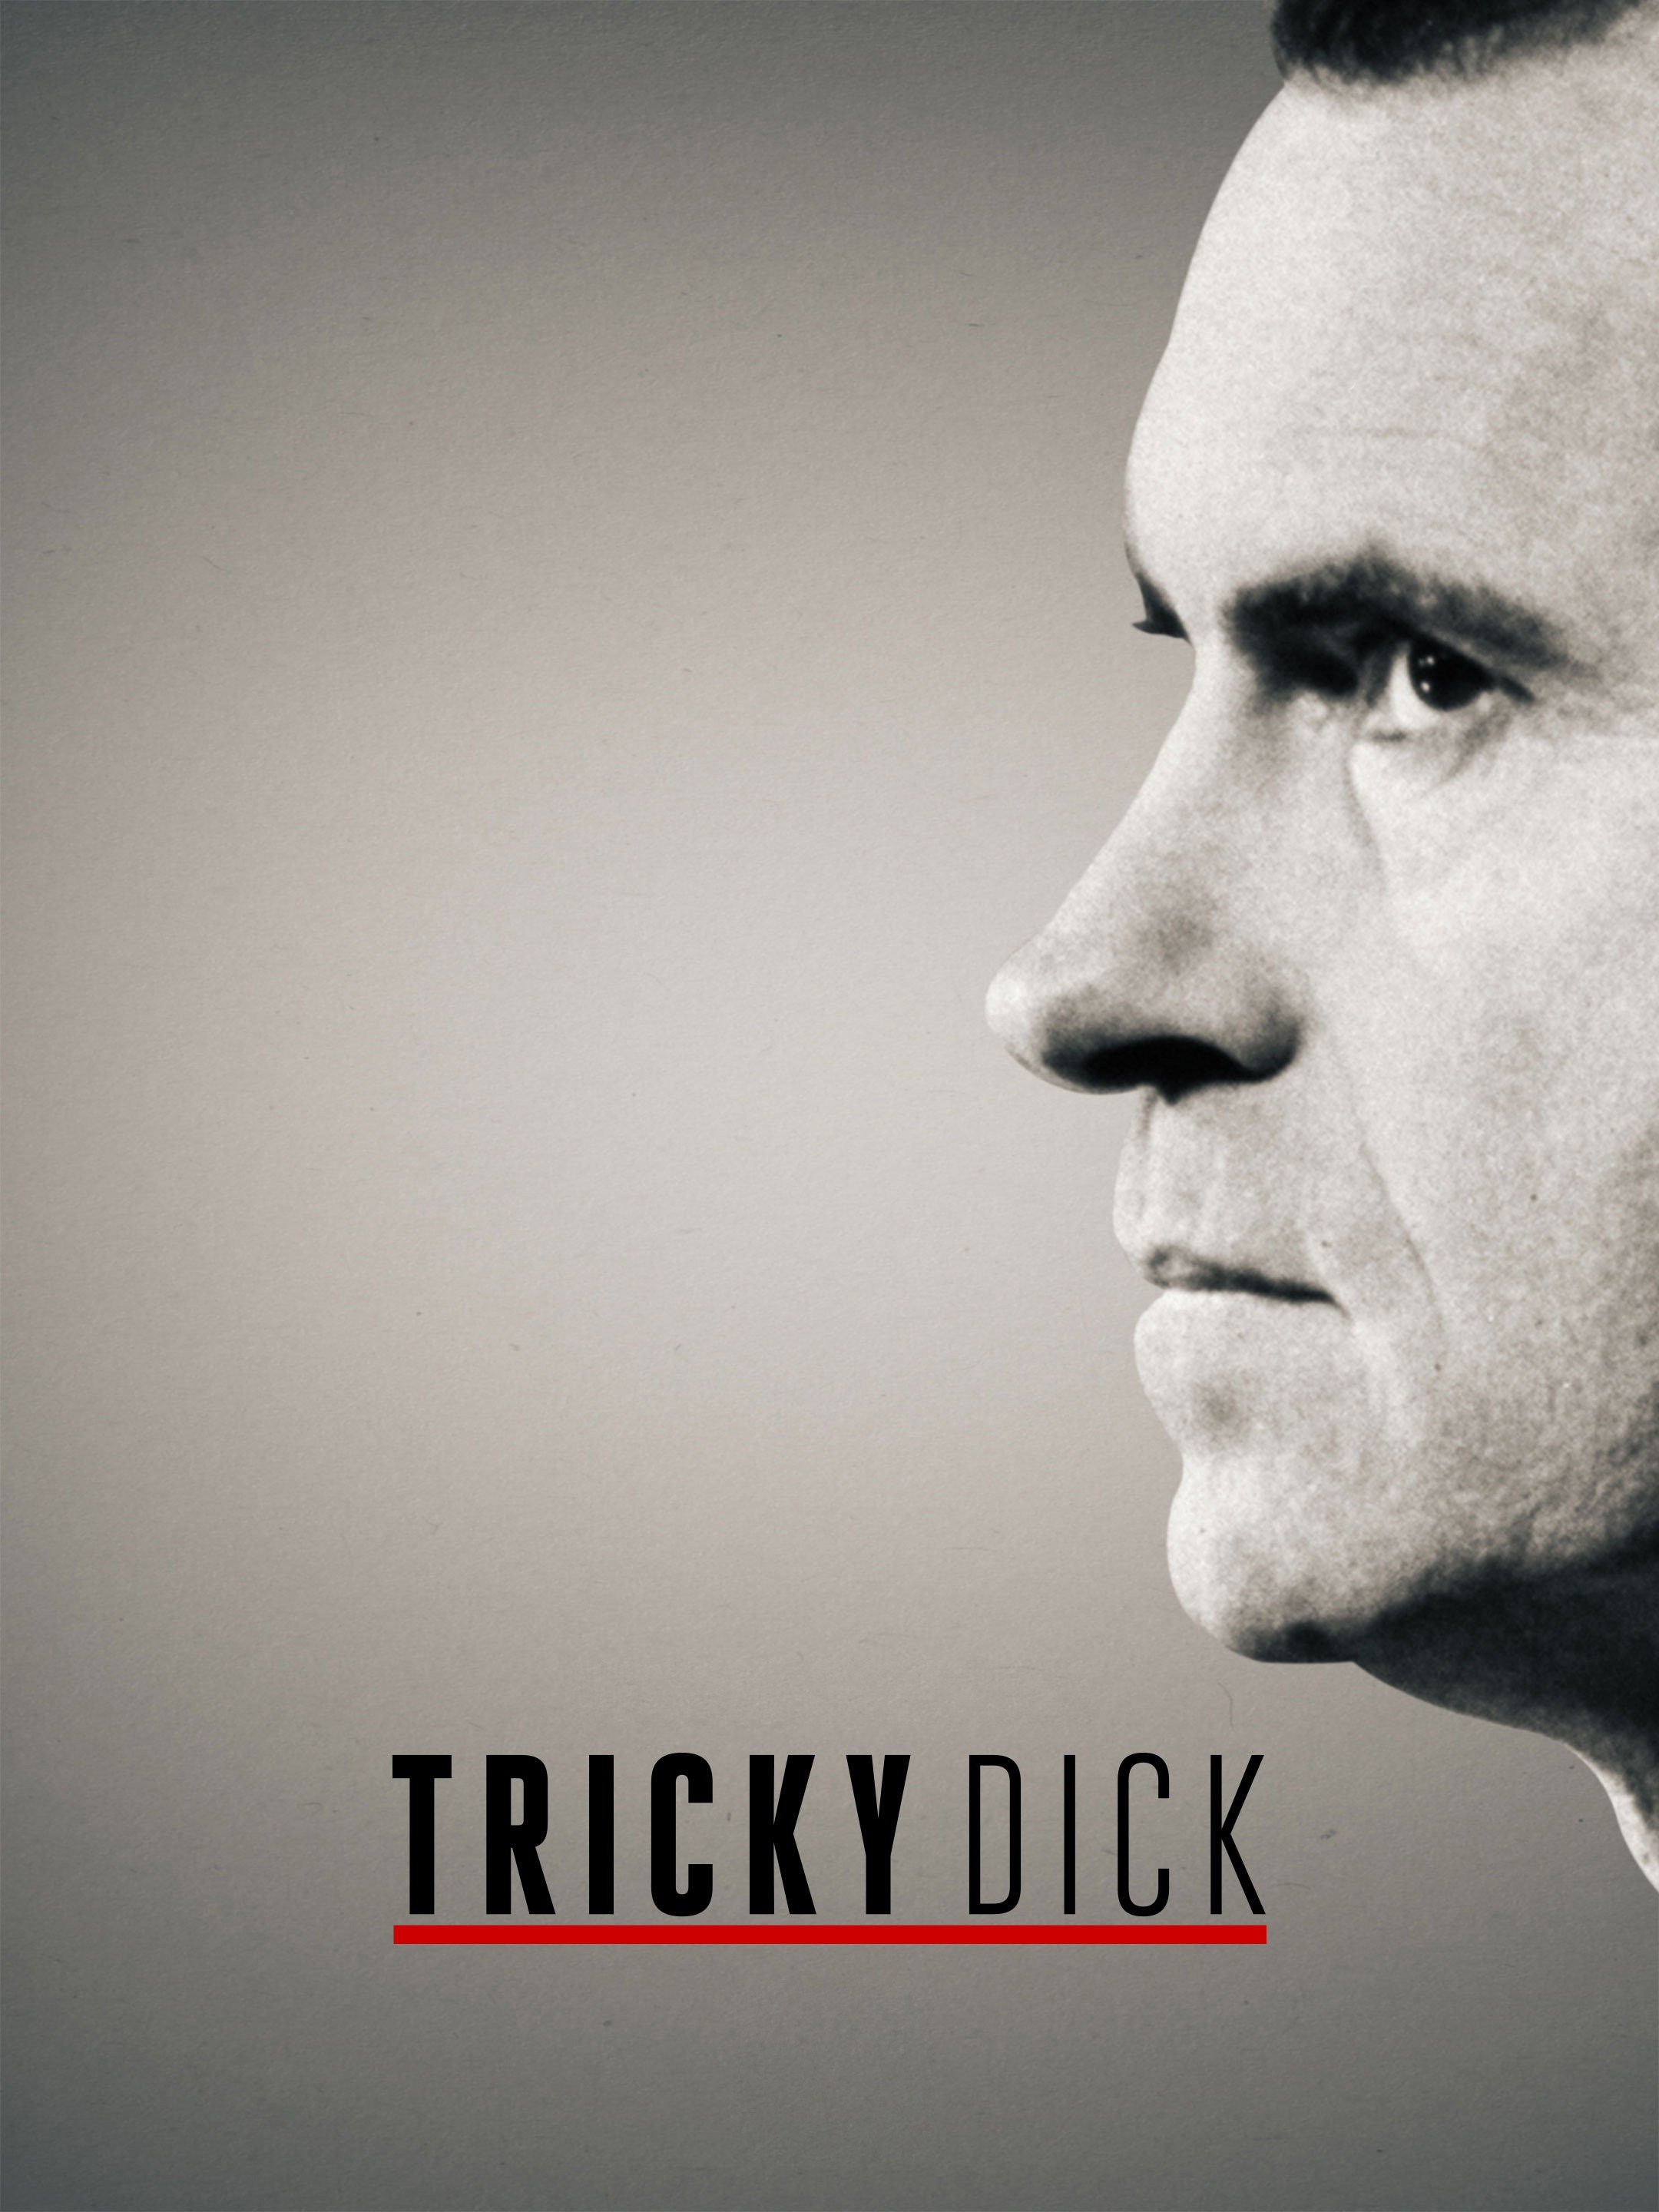 Tricky dick tv show